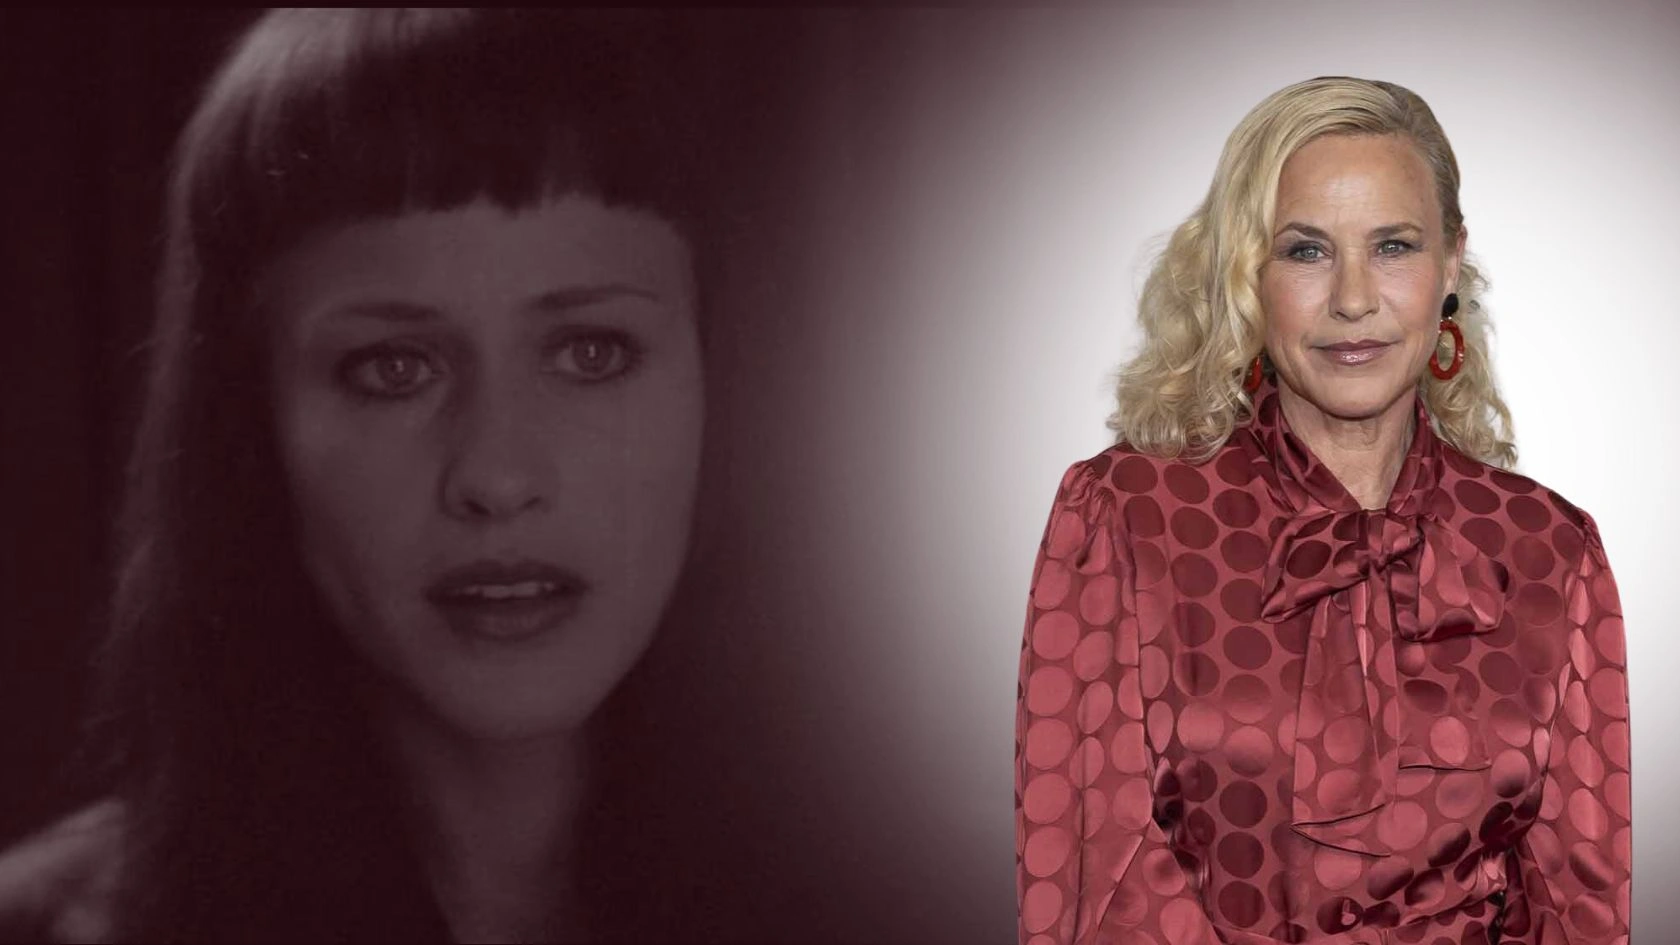 Patricia Arquette opens up about filming 'terrible' scene in 'Lost Highway'